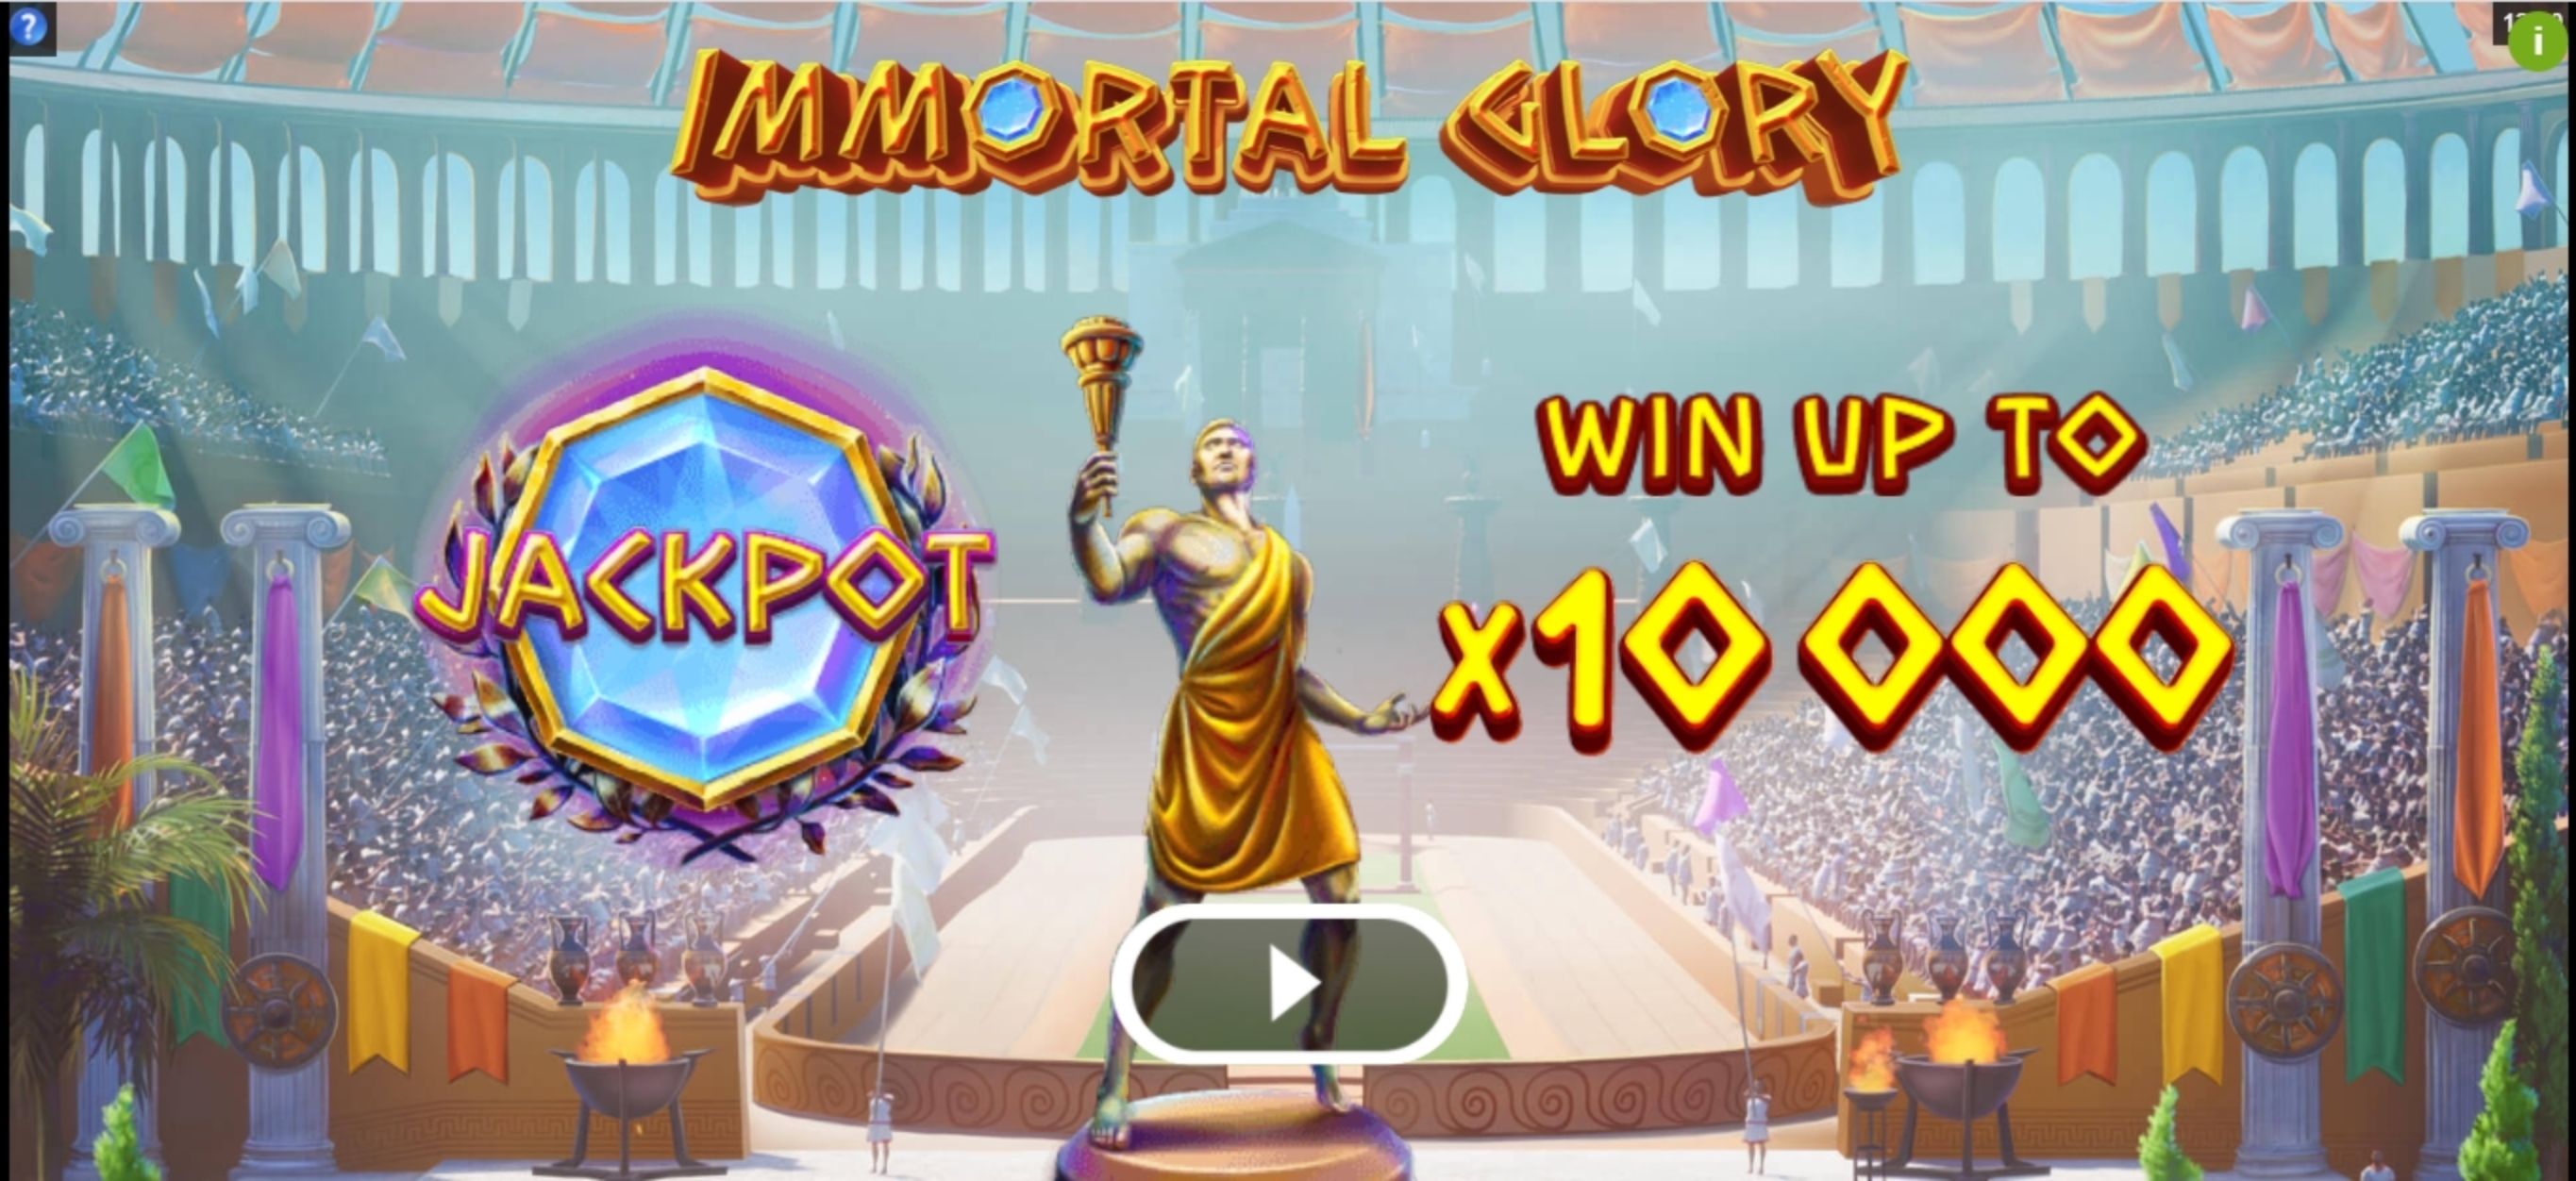 Play Immortal Glory Free Casino Slot Game by Just For The Win